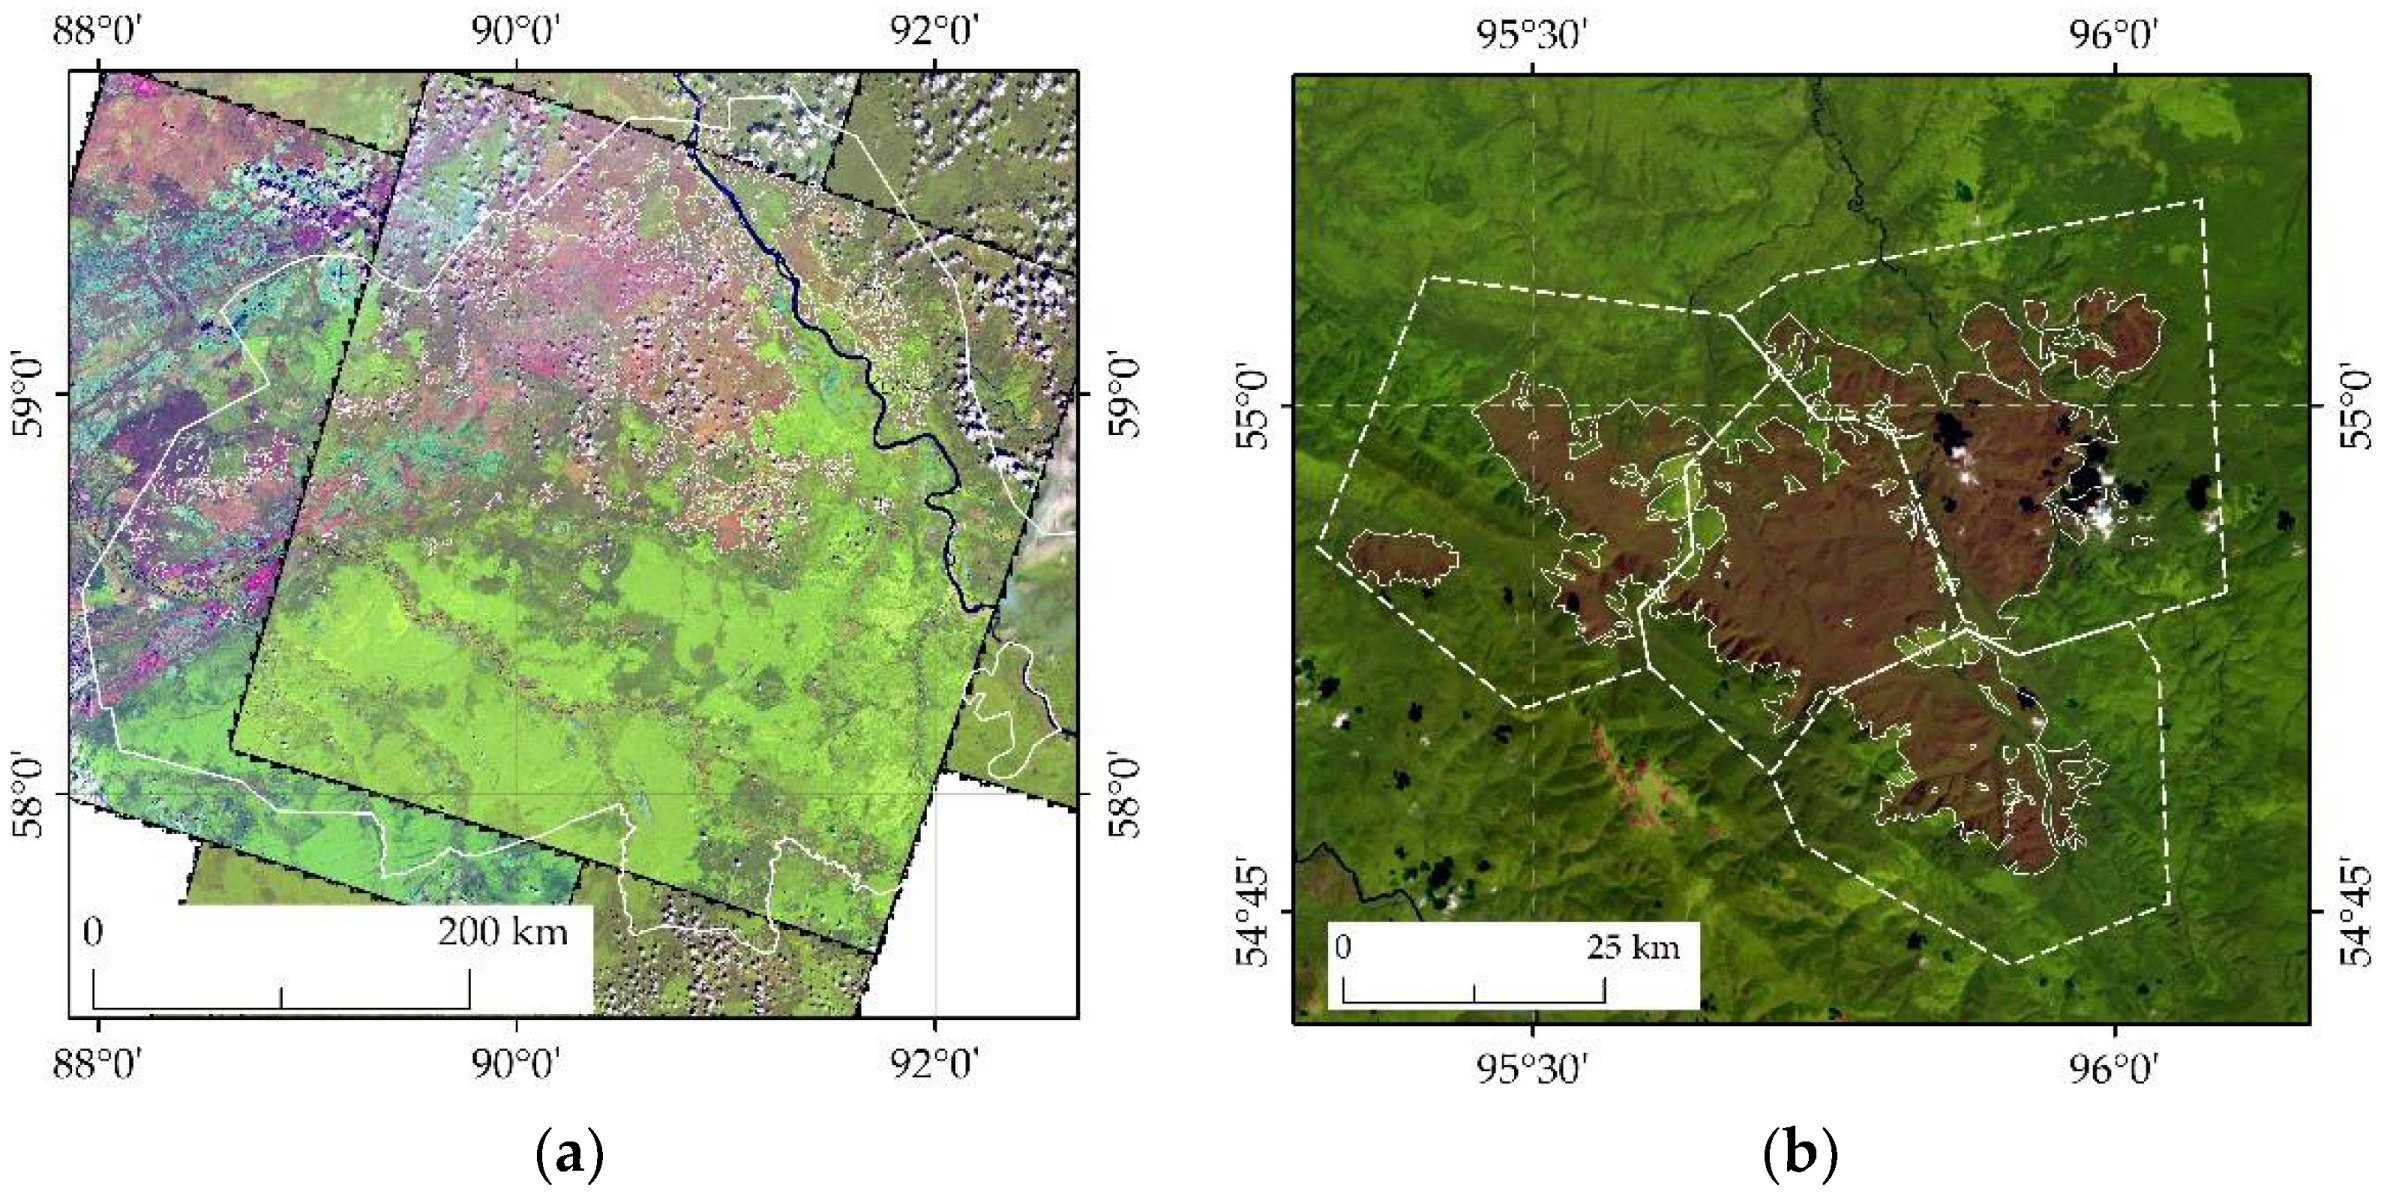 Environmental Sciences Proceedings | Free Full-Text | Spatial Dynamics of  Tree Stand Disturbance under Siberian Silk Moth (Dendrolimus sibiricus)  Impact in Central Siberia in 2016&ndash;2020 Based on Remote Sensing Data